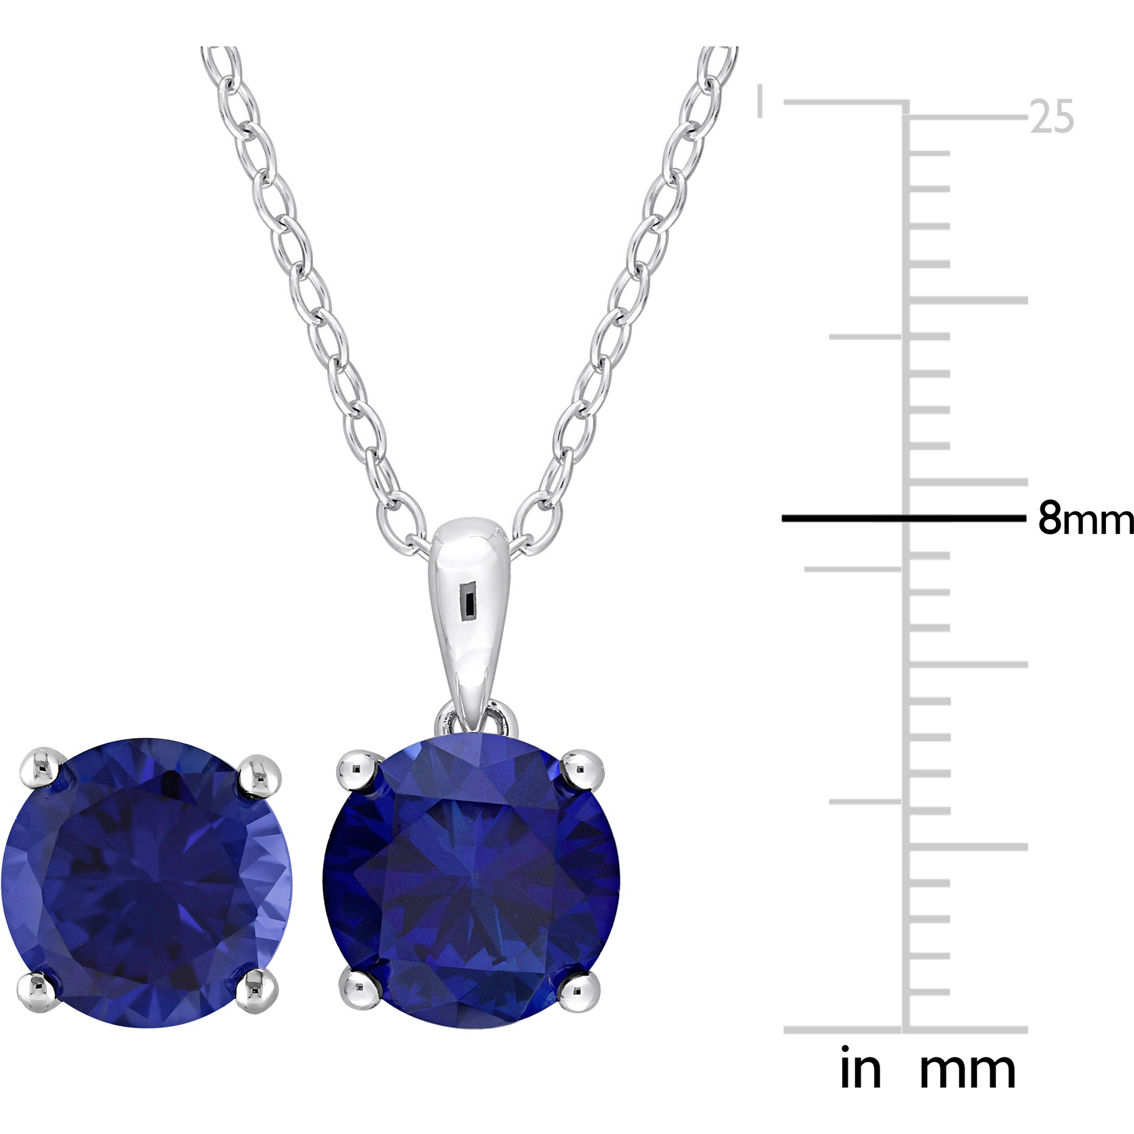 Sofia B. Sterling Silver Created Blue Sapphire Solitaire Necklace and Earrings - Image 4 of 4